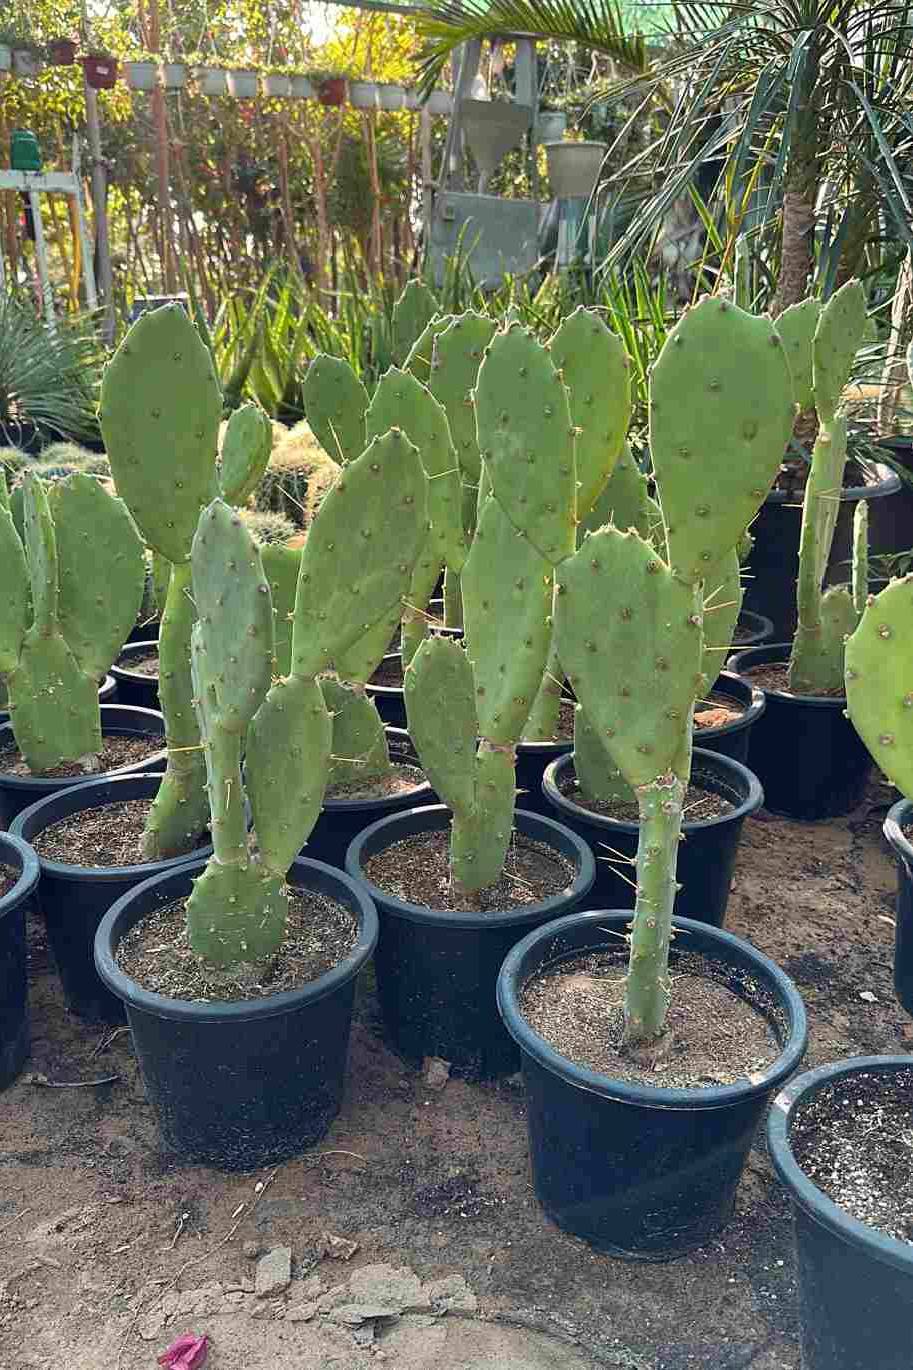 Prickly Pears Cactus